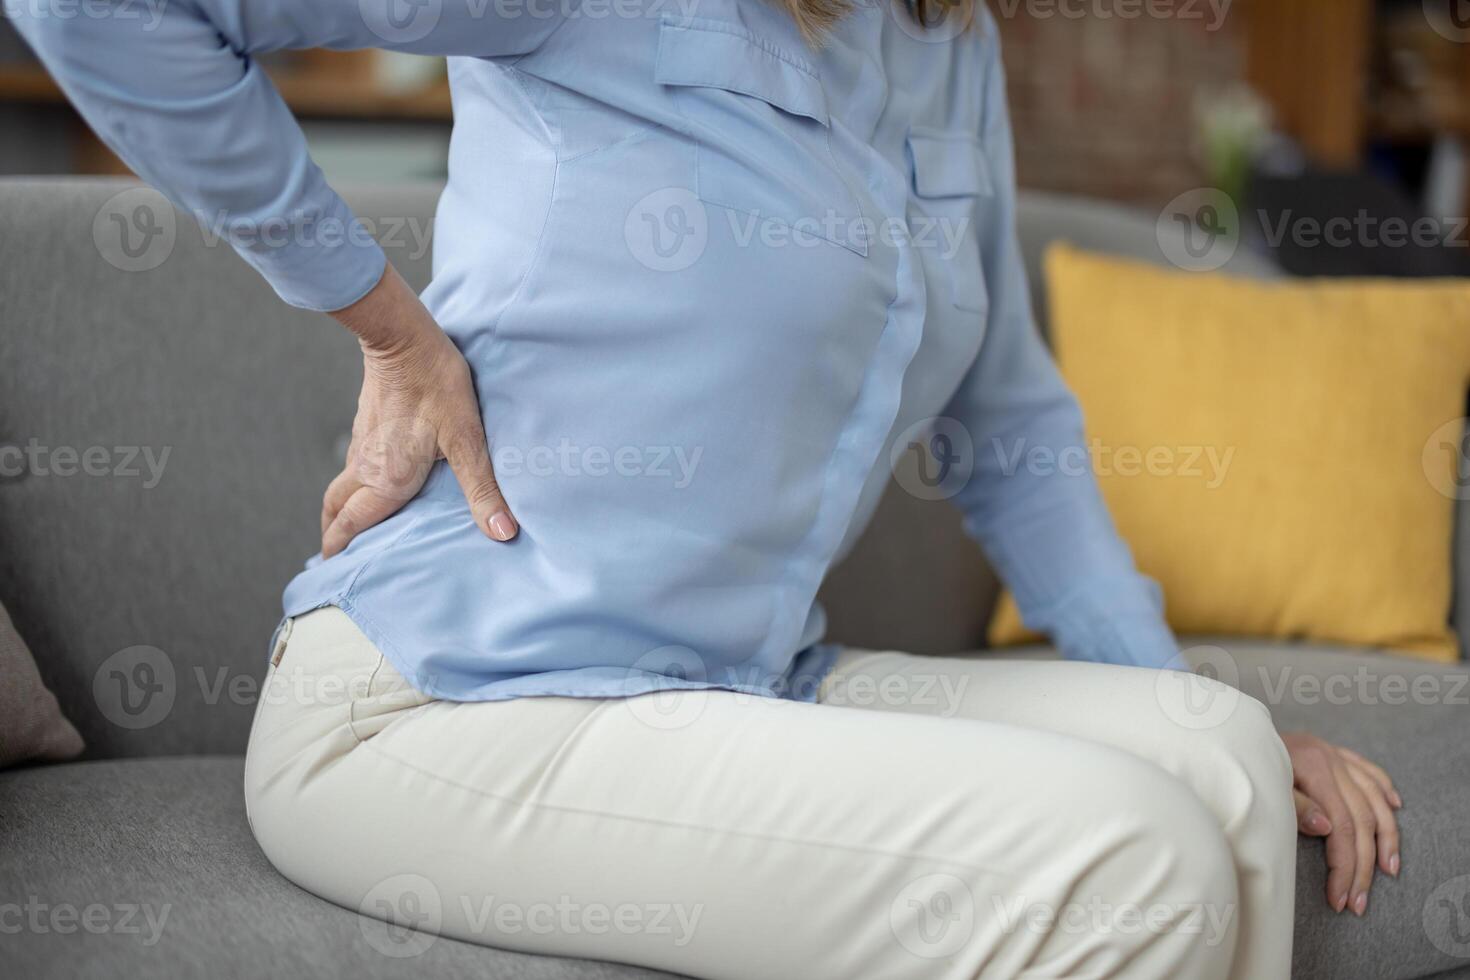 A senior female sitting on a sofa clutching her lower back in pain, highlighting the discomfort many elderly experience in daily life. photo